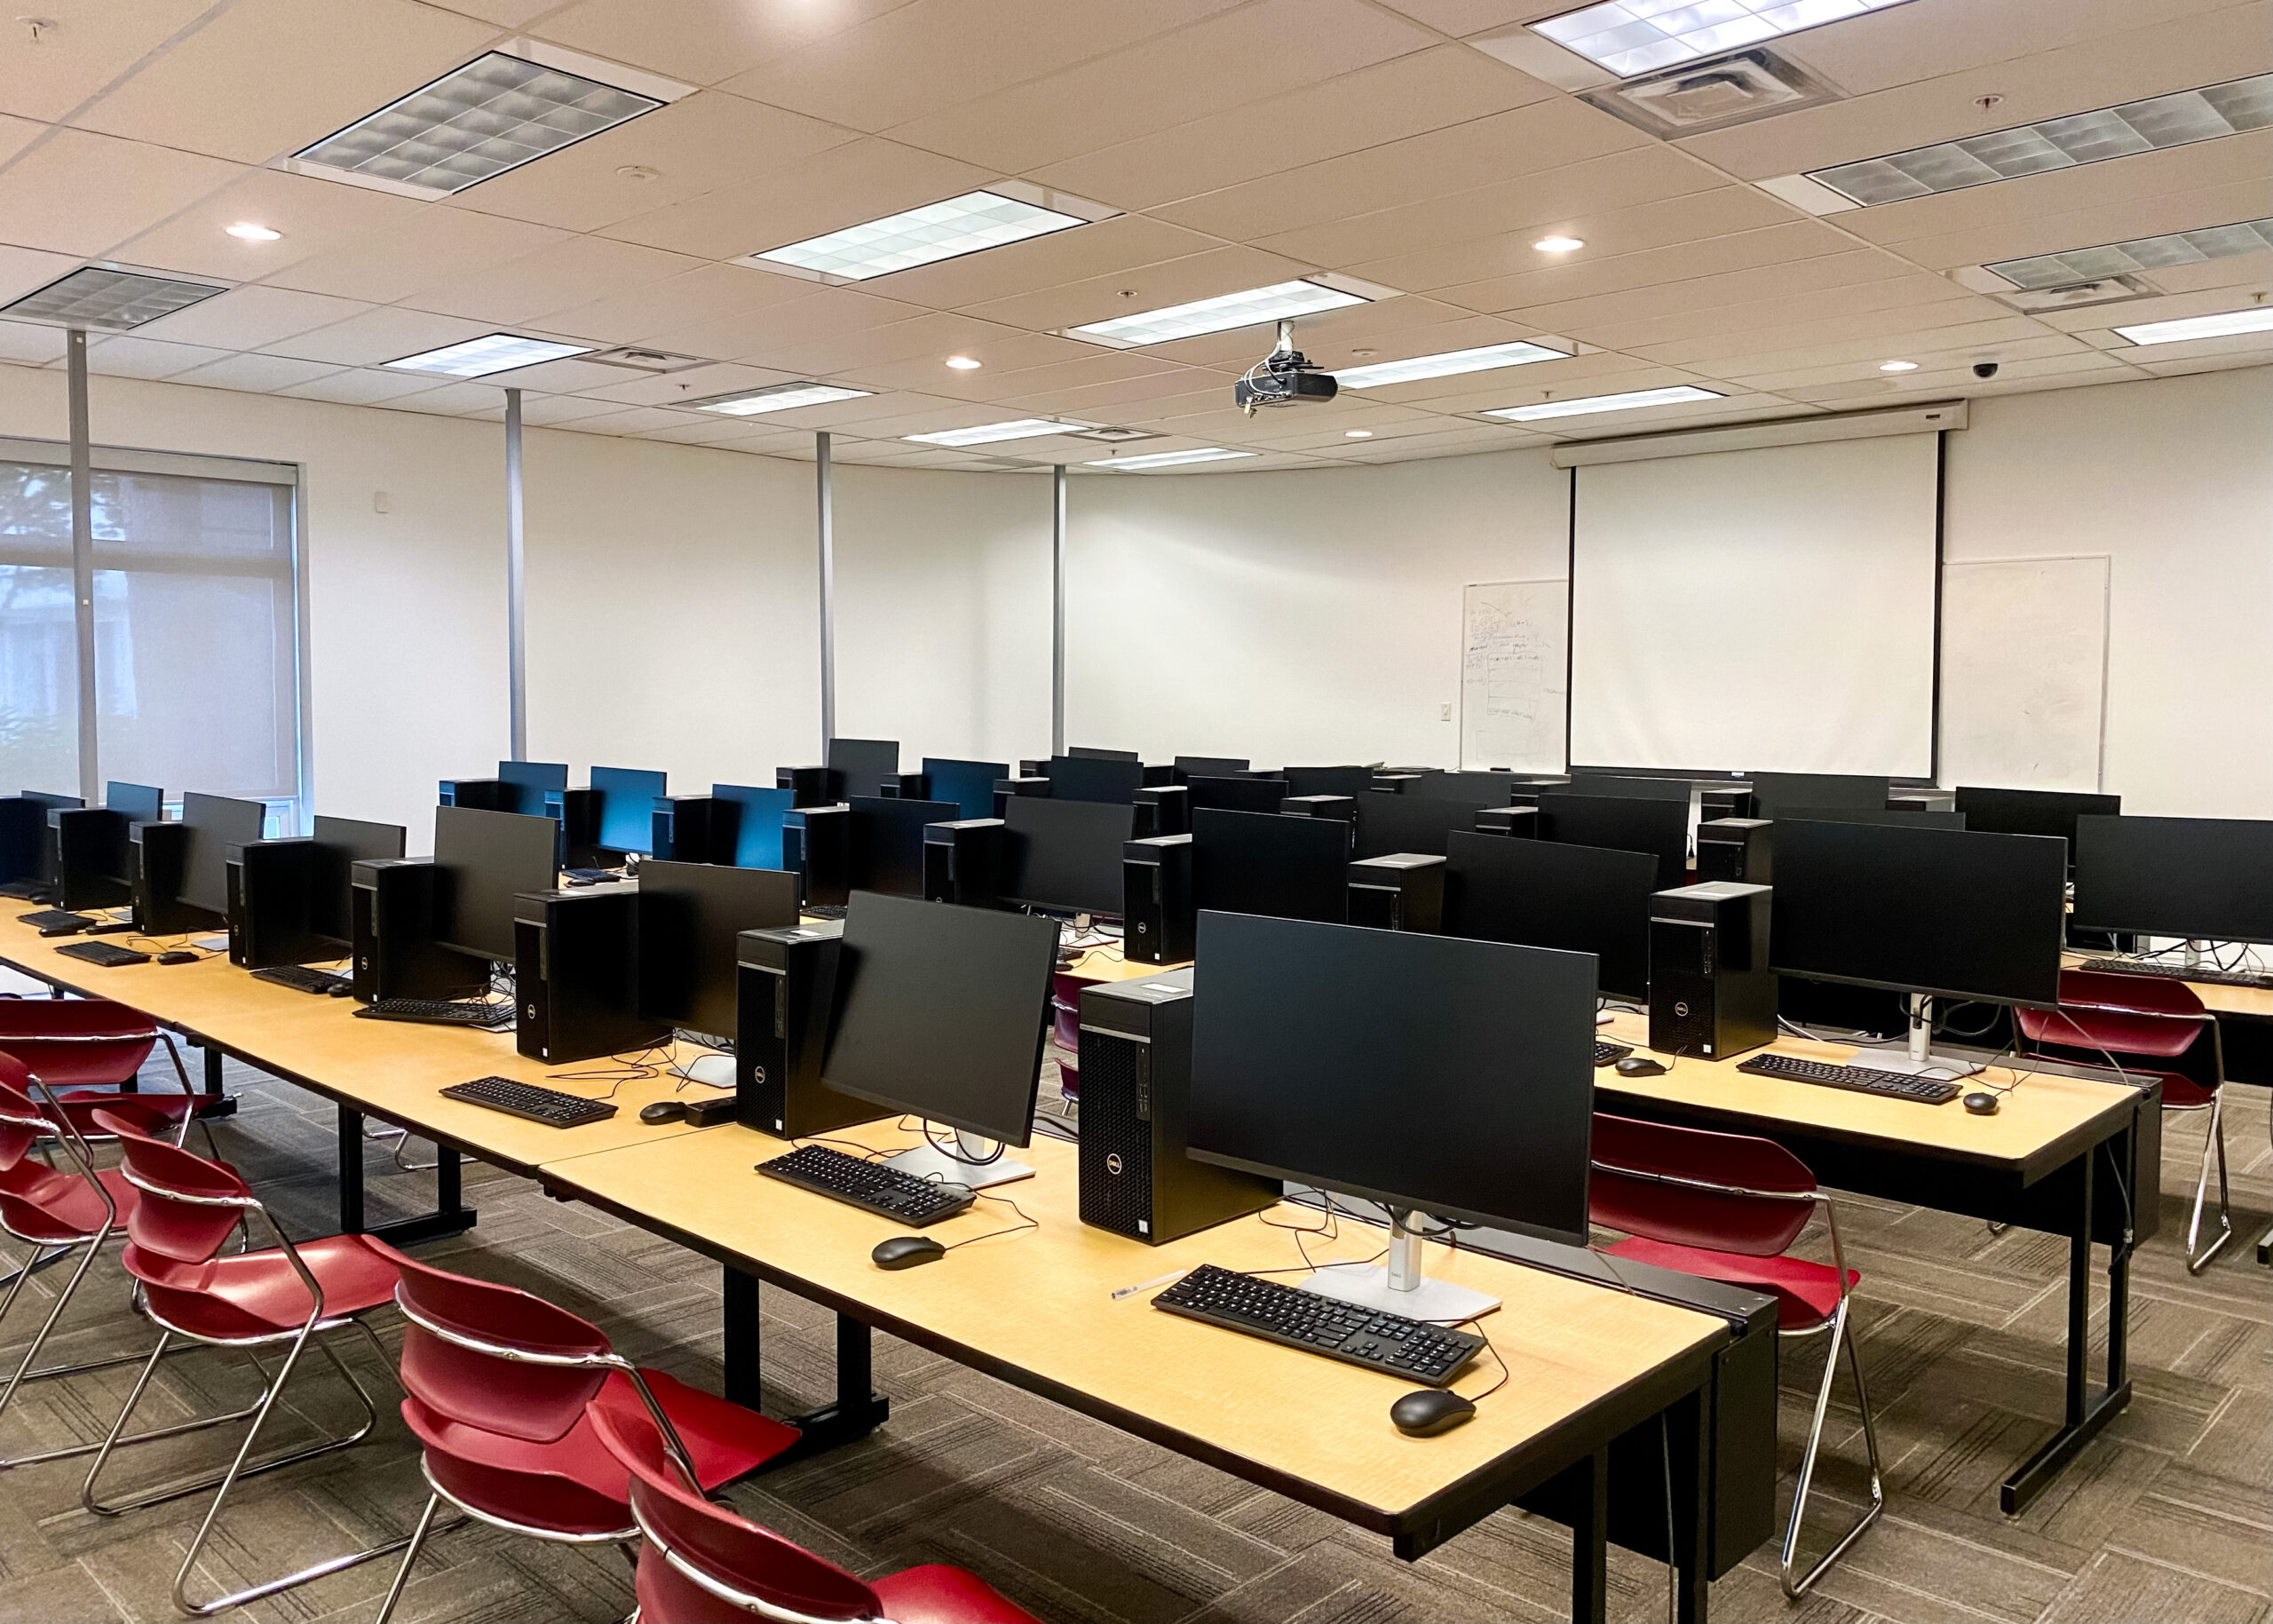 The photo is of the SFU computer lab. Rows of computers fill the room. The room has no people and the computers are all turned off.